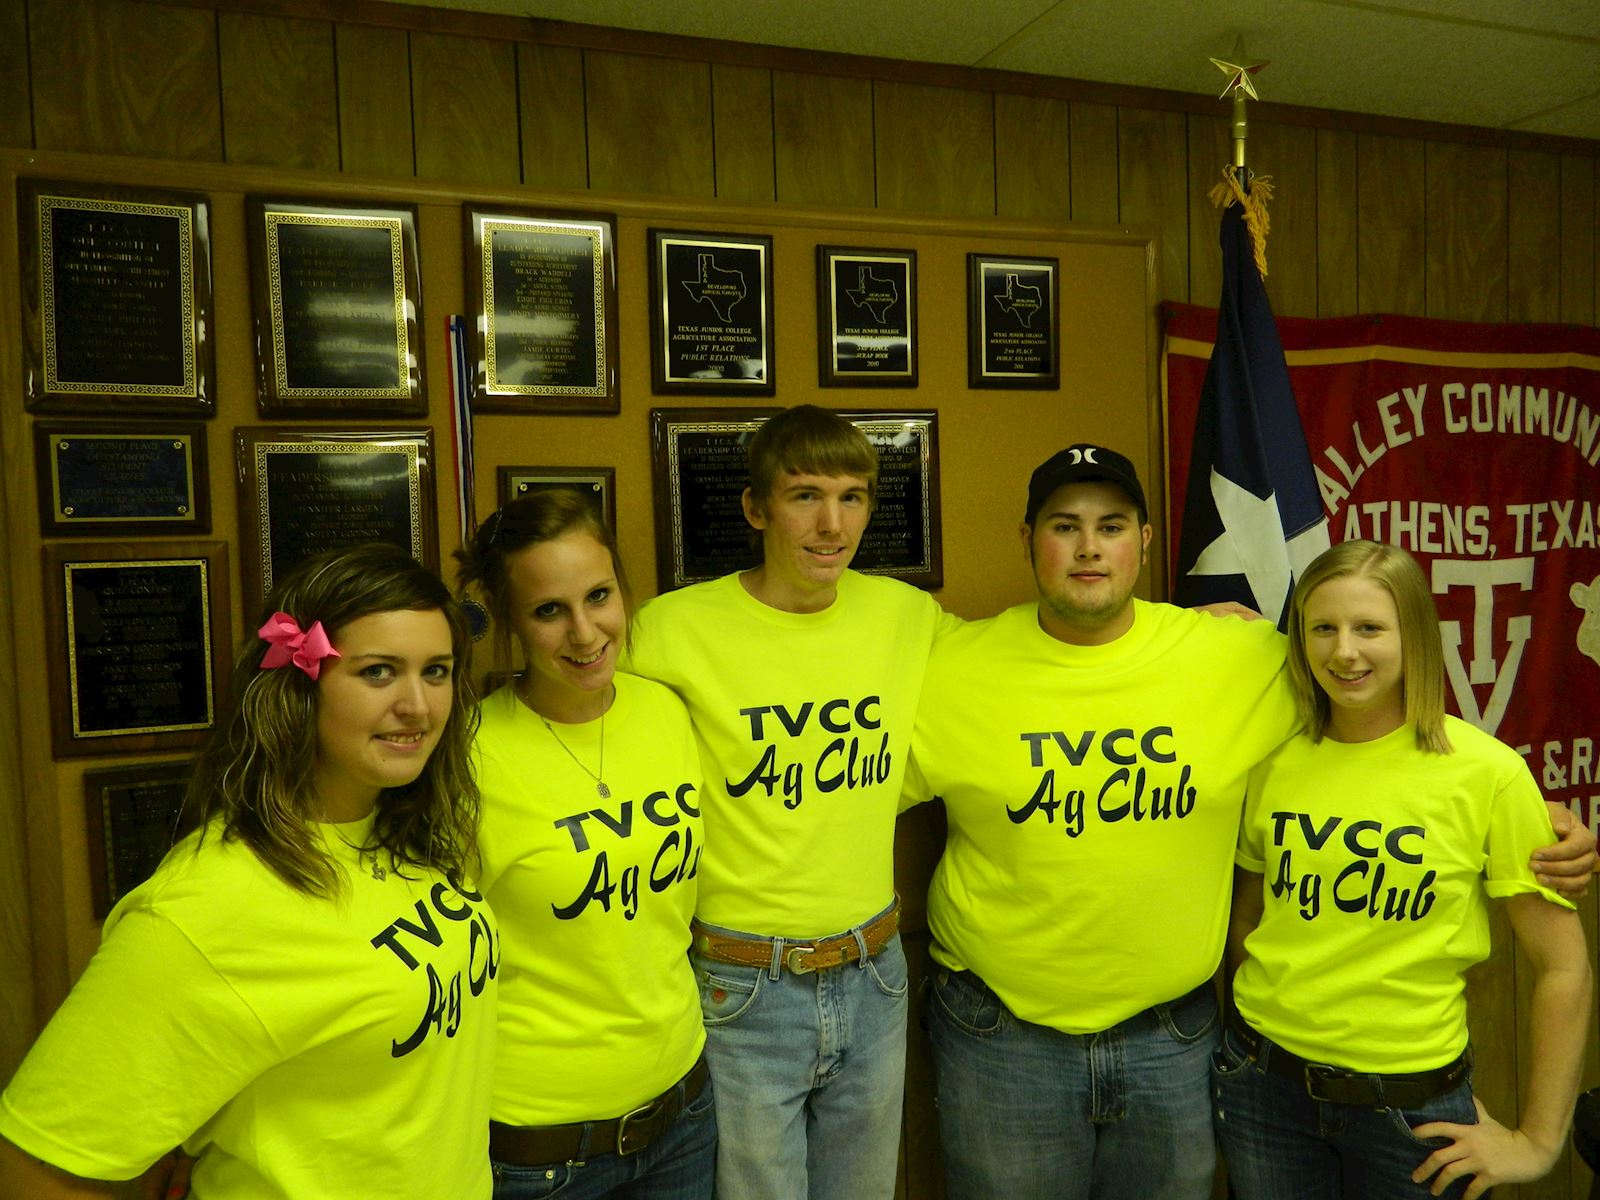 Officers: L-R, Taylor Murhphy, Samantha Kinzie, Taylor Brown, Cody Barnes, and Katie Newsom. (not pictured - Alexa Williams)